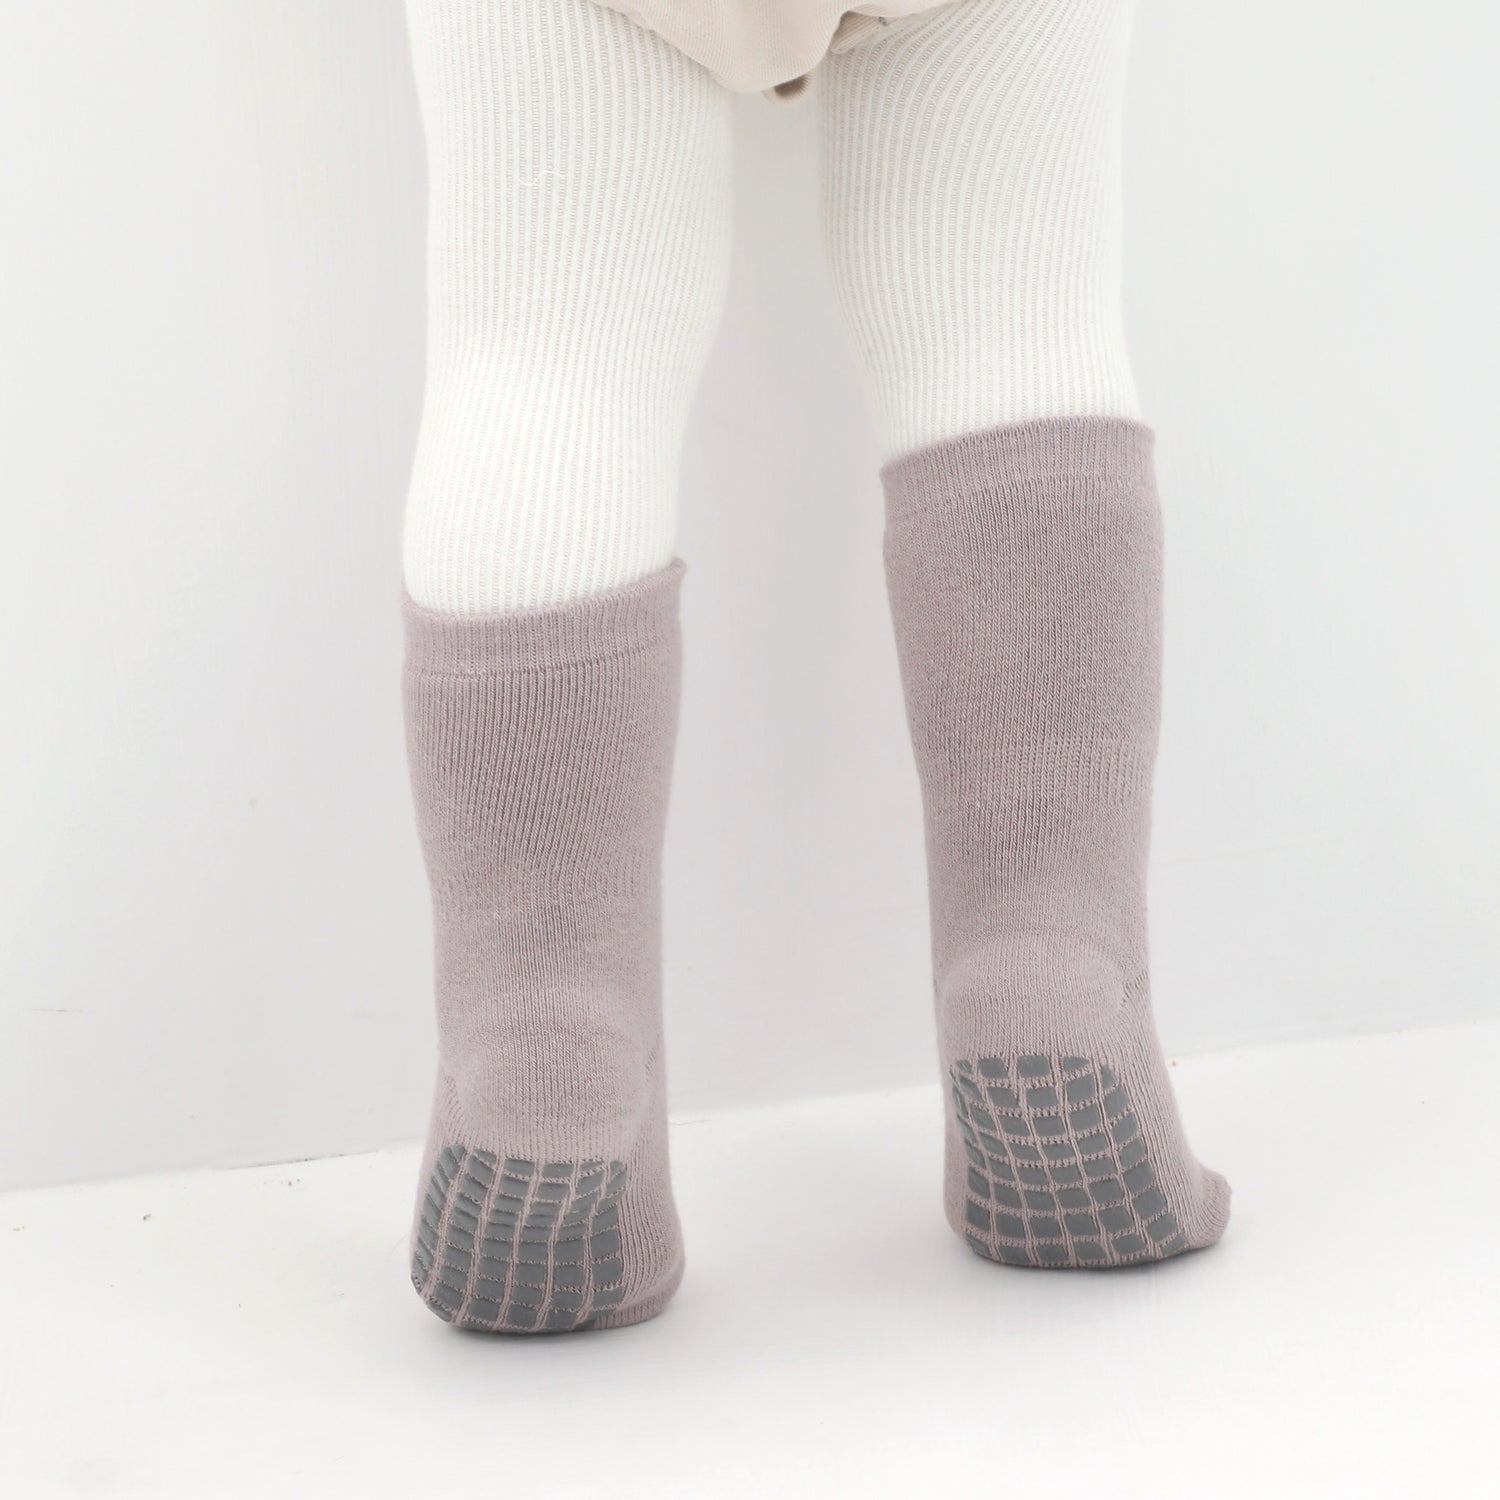 Baby socks with non-slip ankle grips for stability.